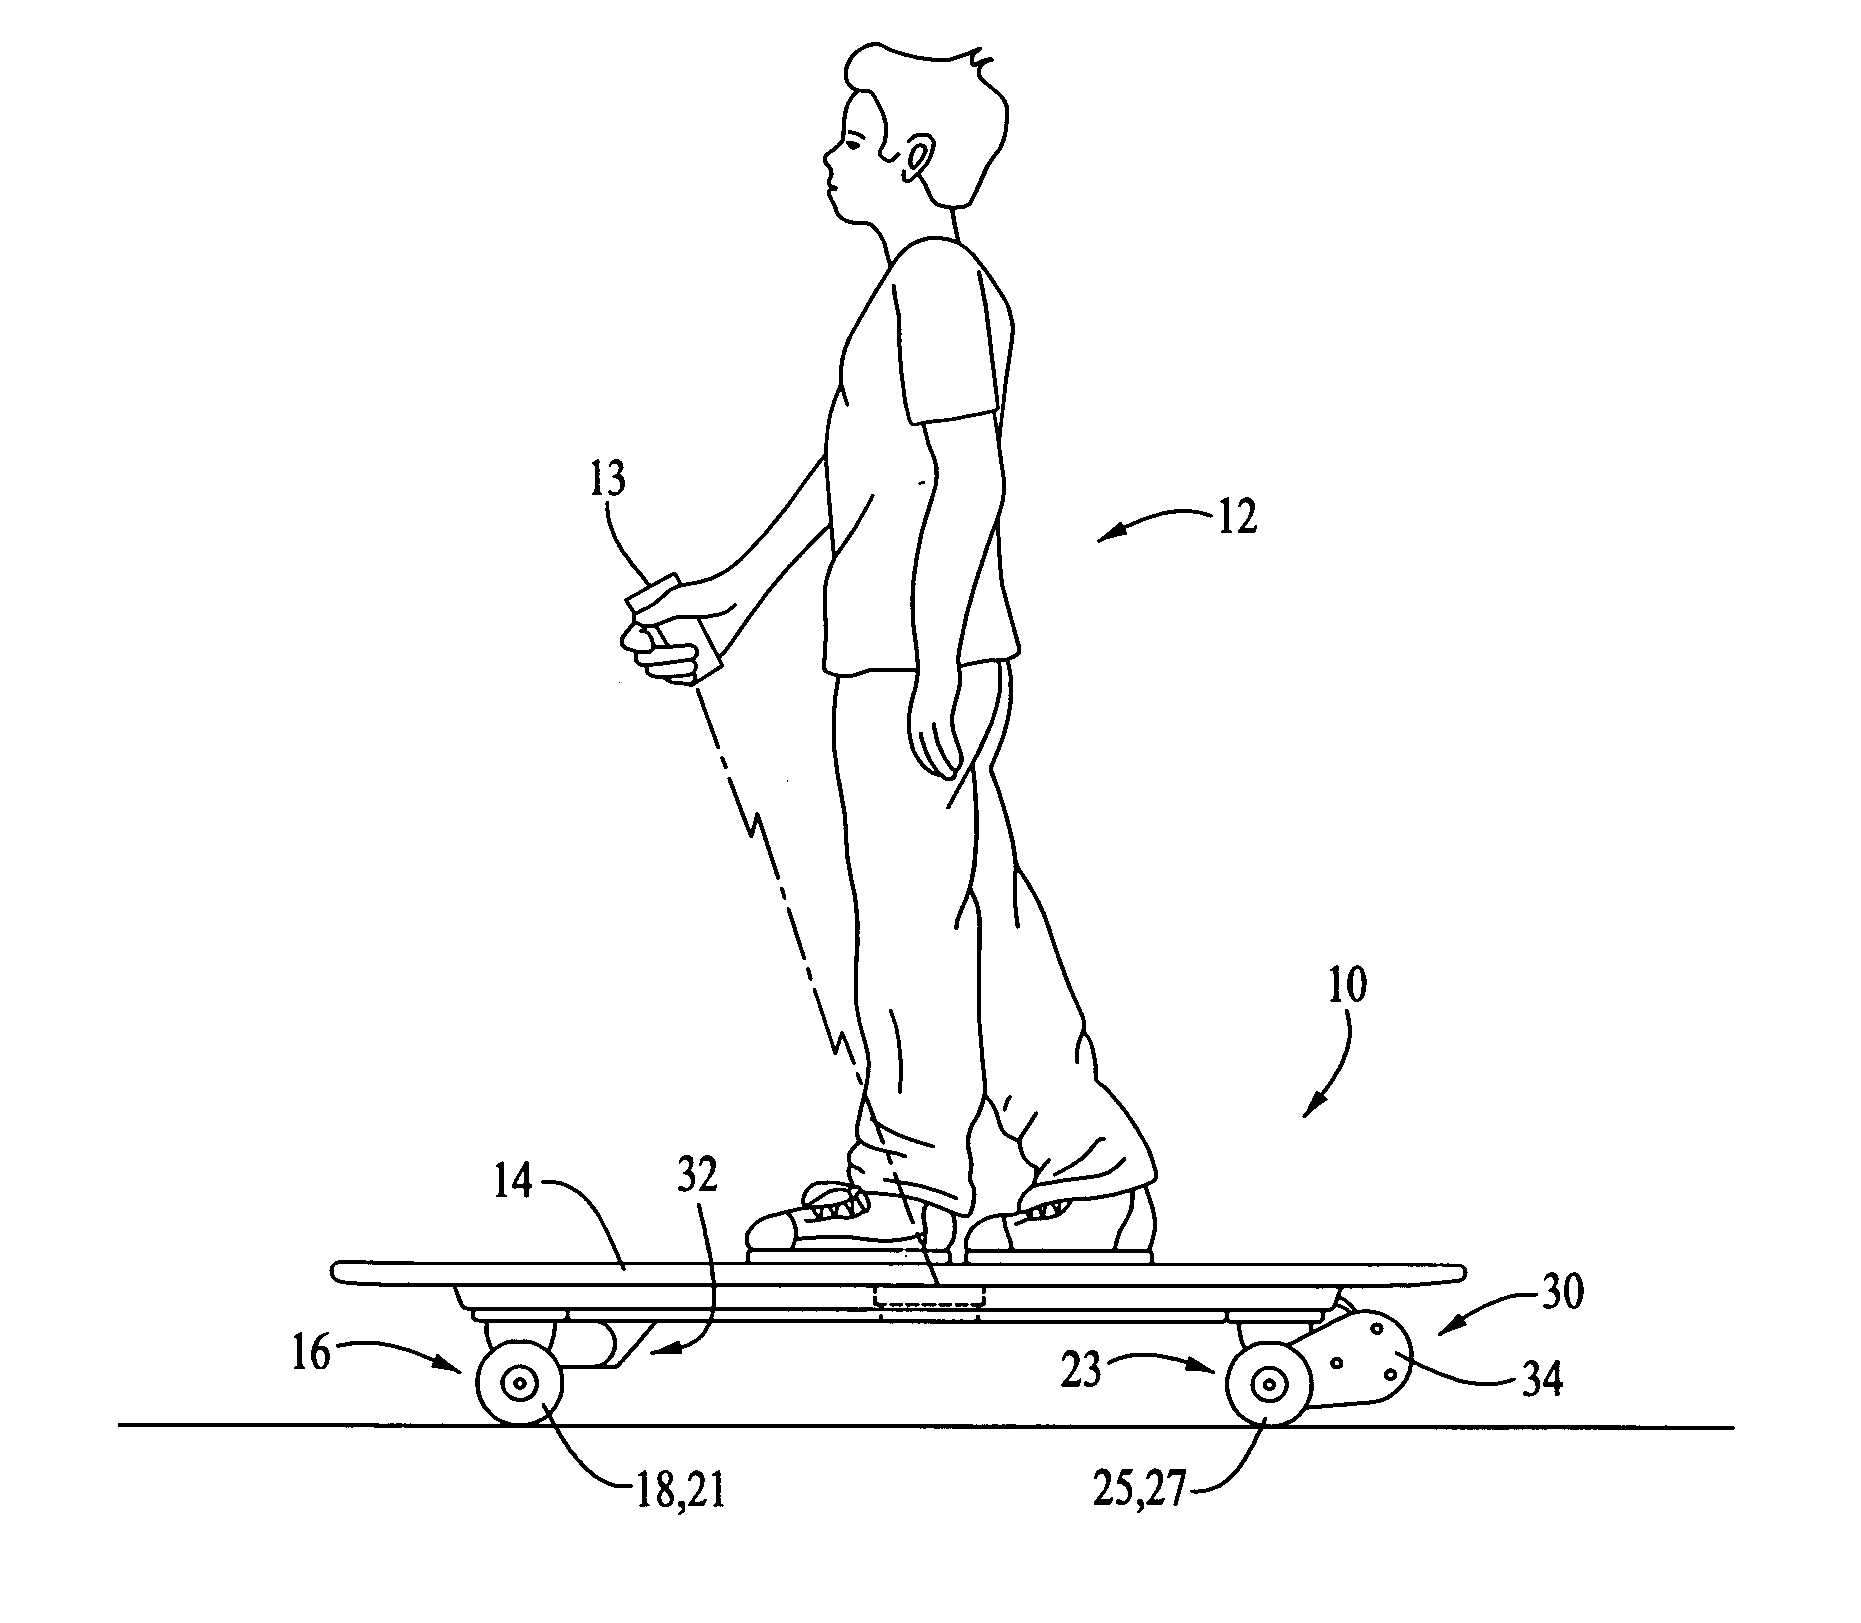 Skateboard with motorized drive and brake systems